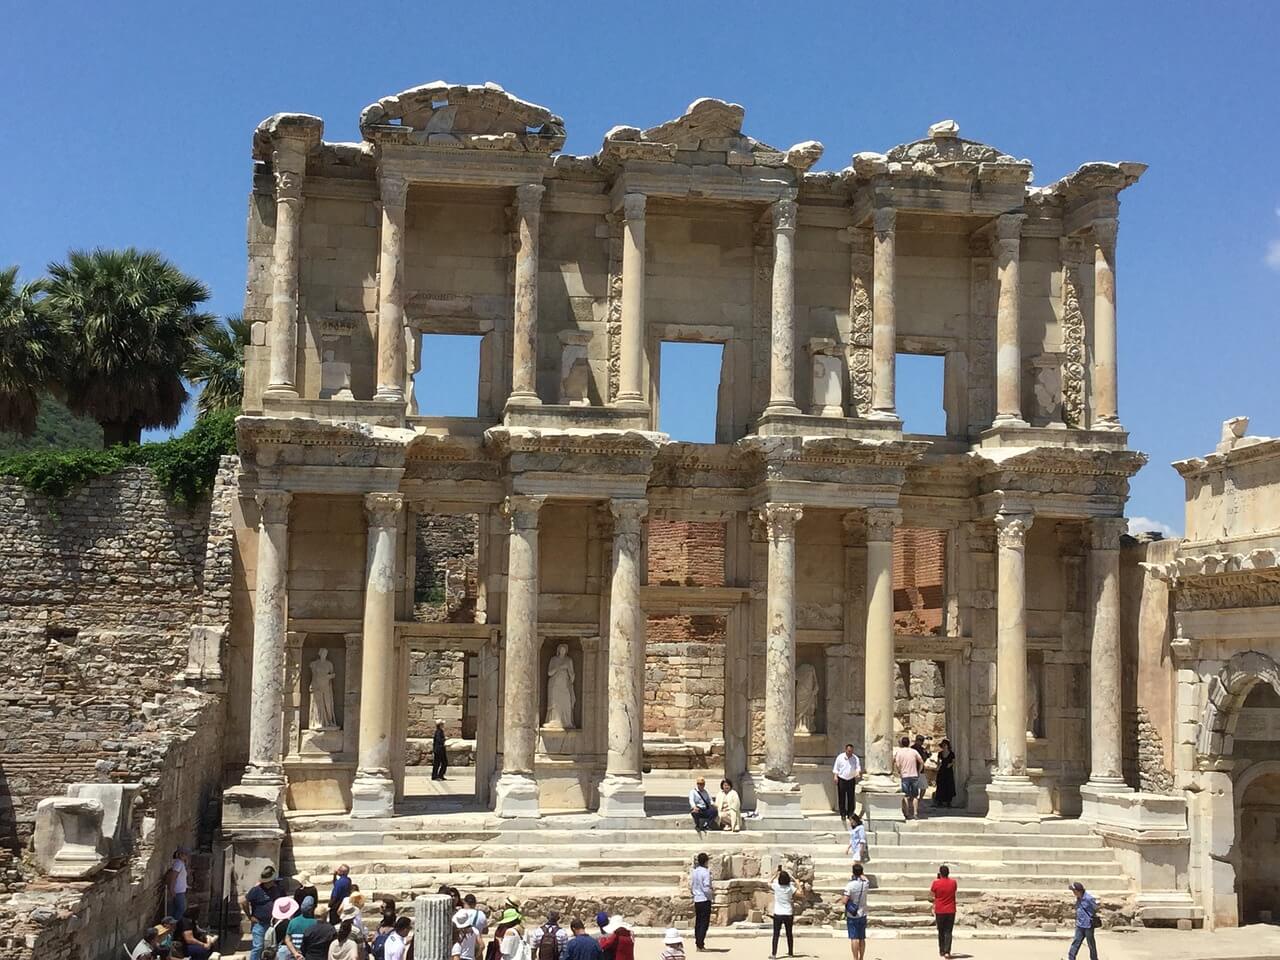 The spectacular Library of Celsus at Ephesus, Turkey